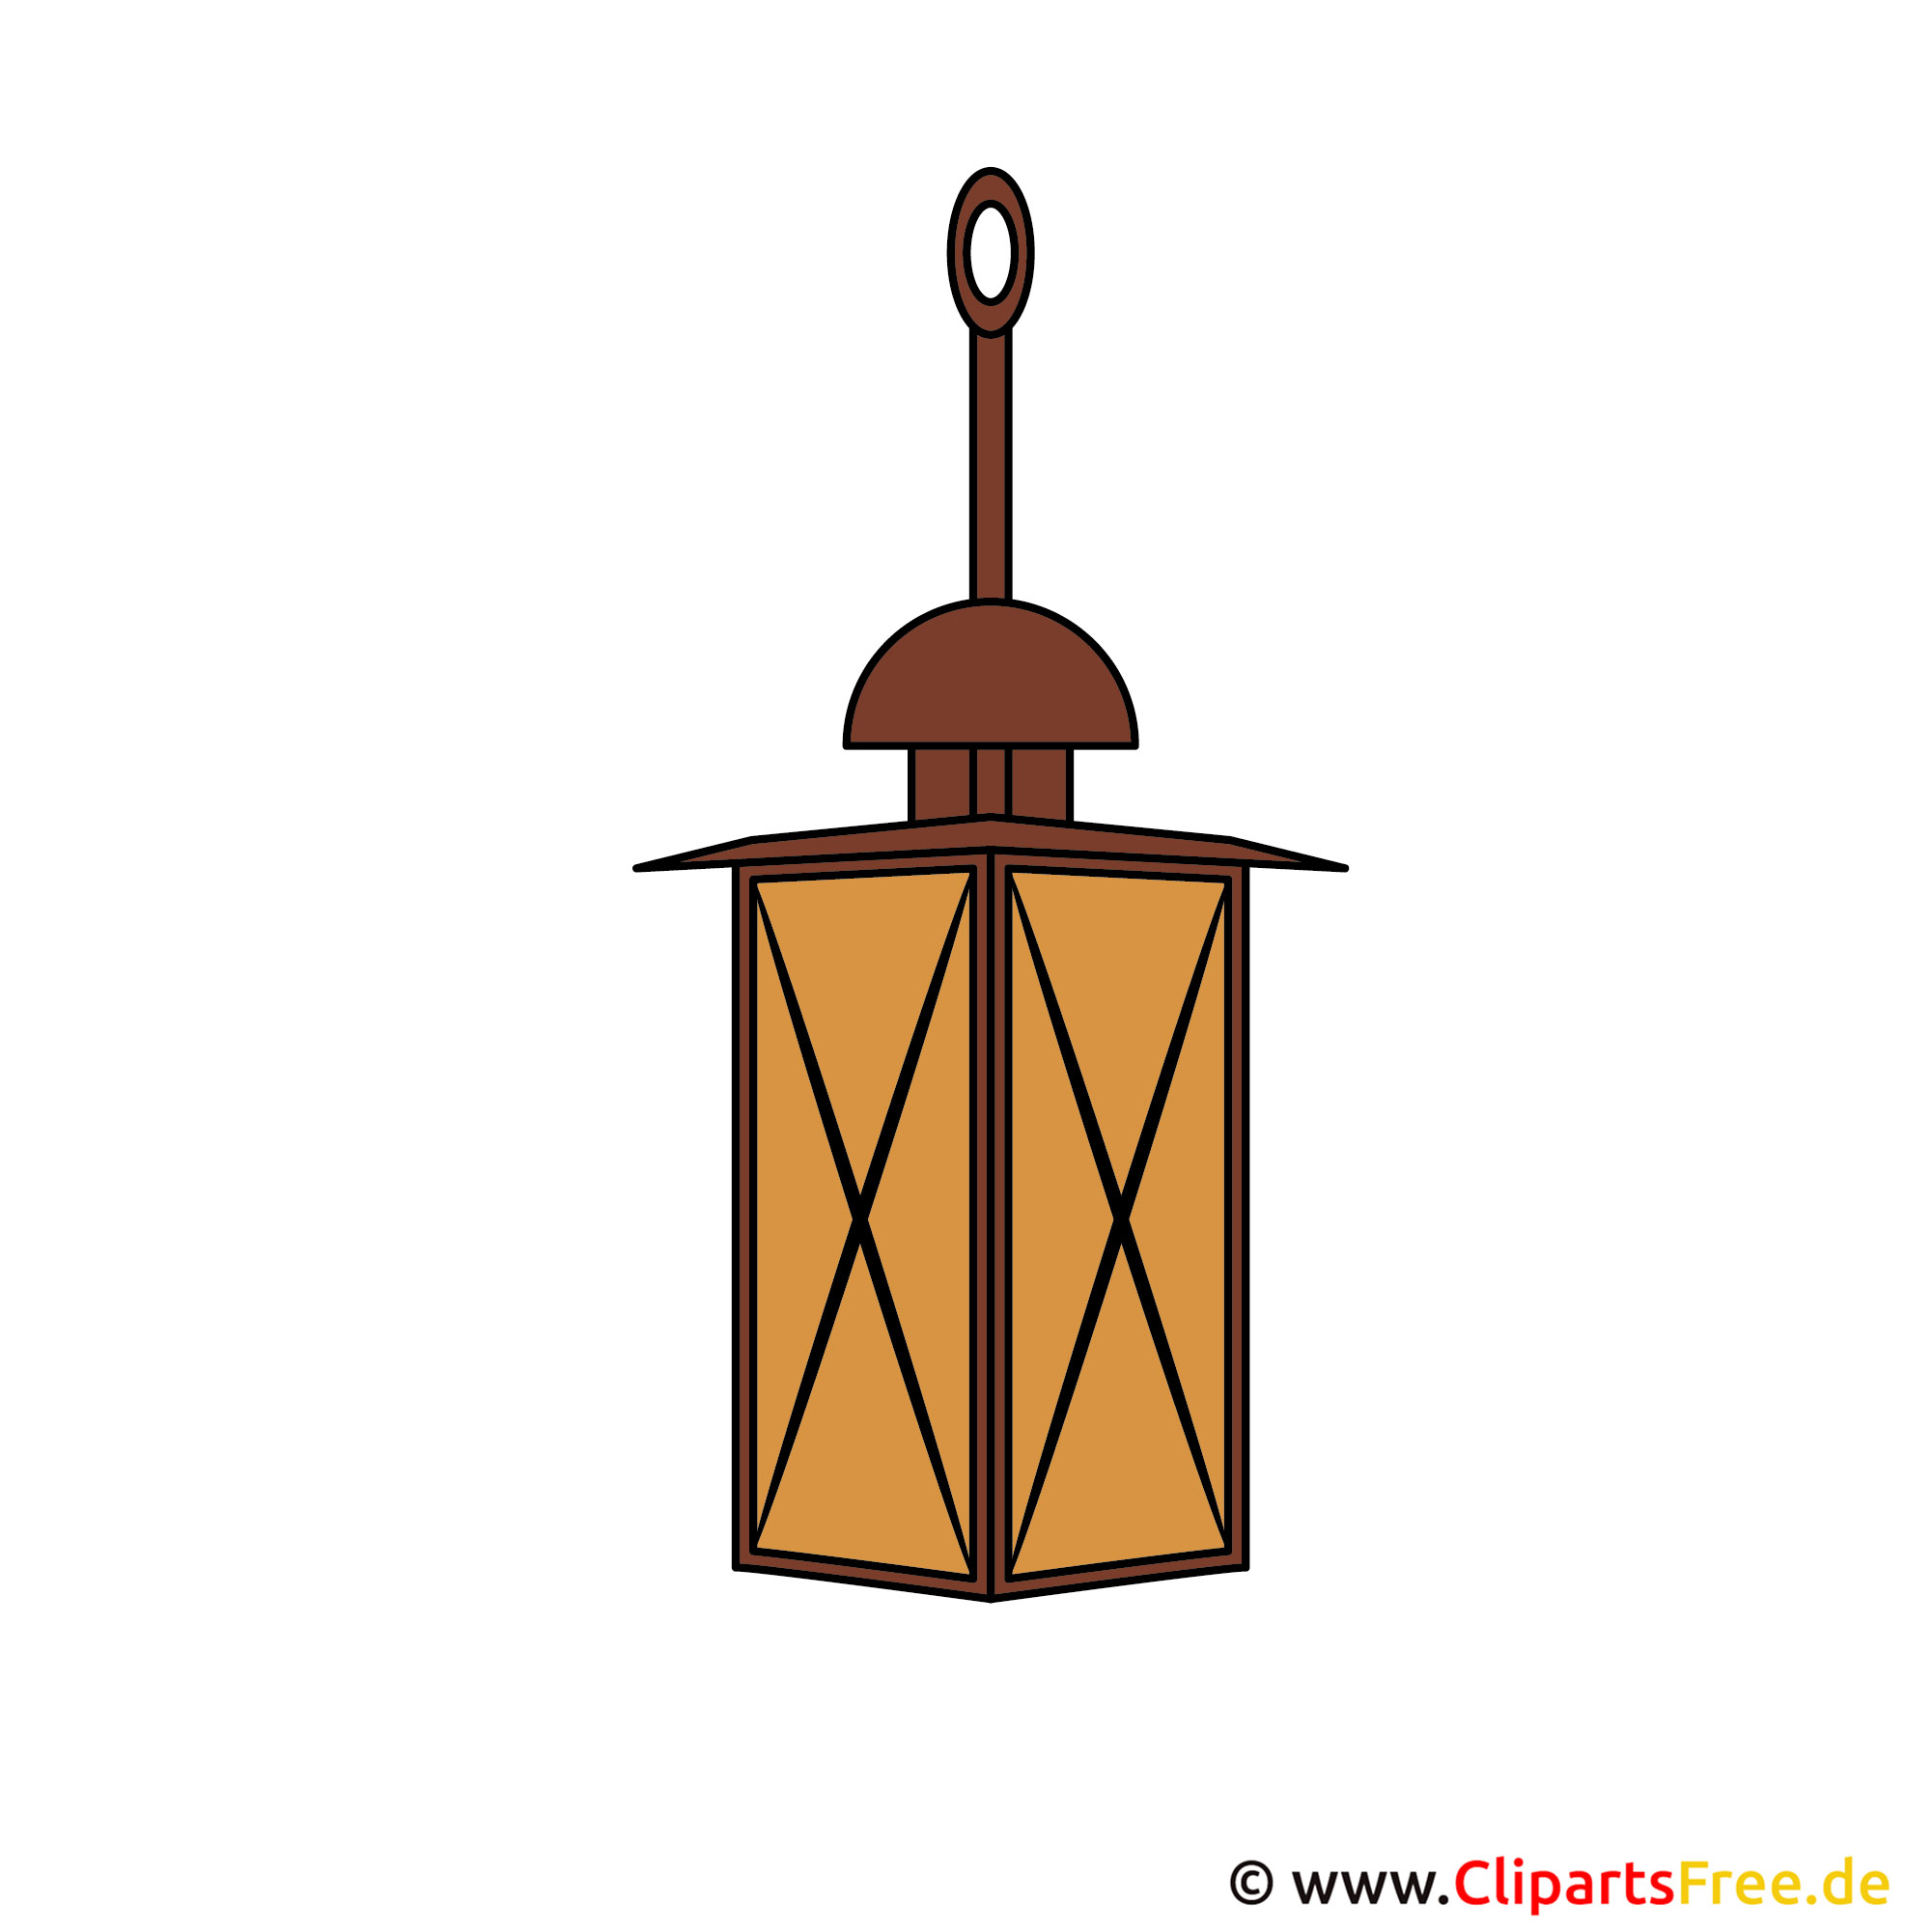 laterne clipart